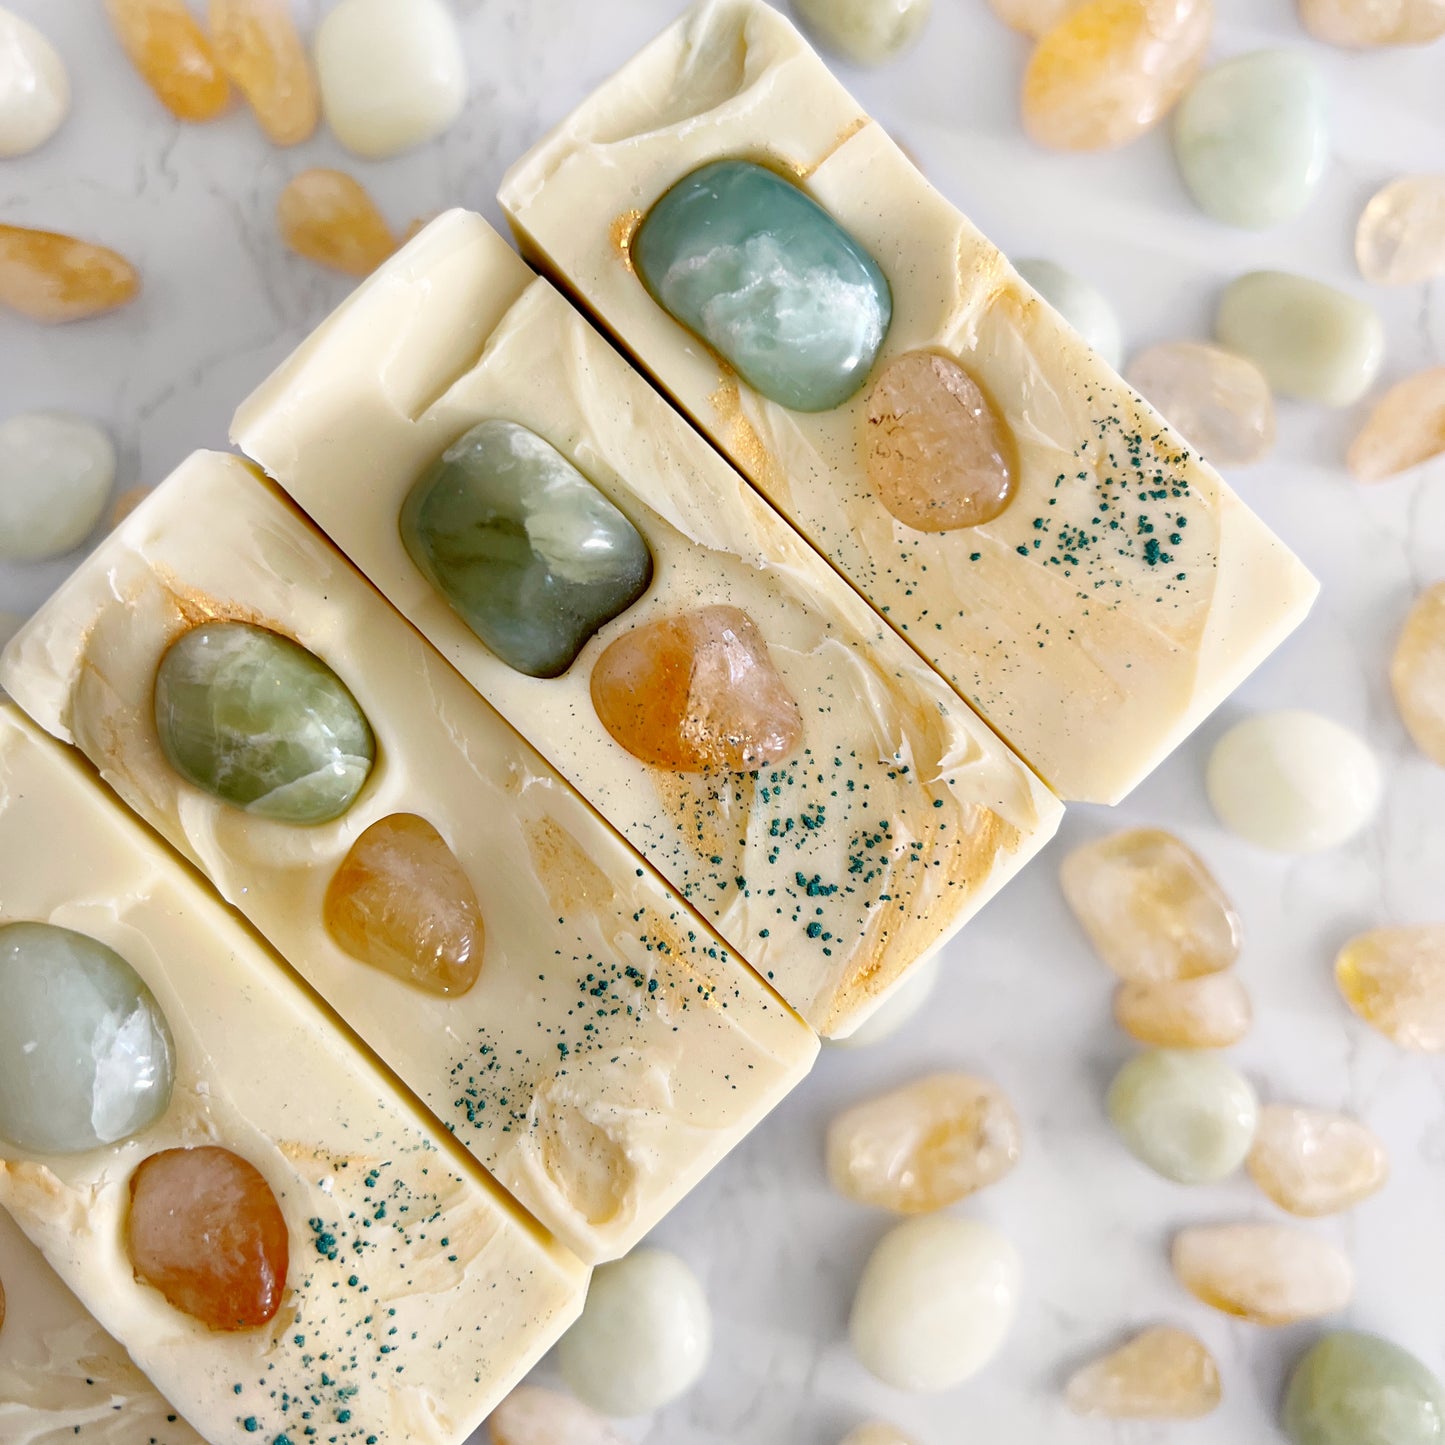 Crystal soaps featuring jade and citrine crystals